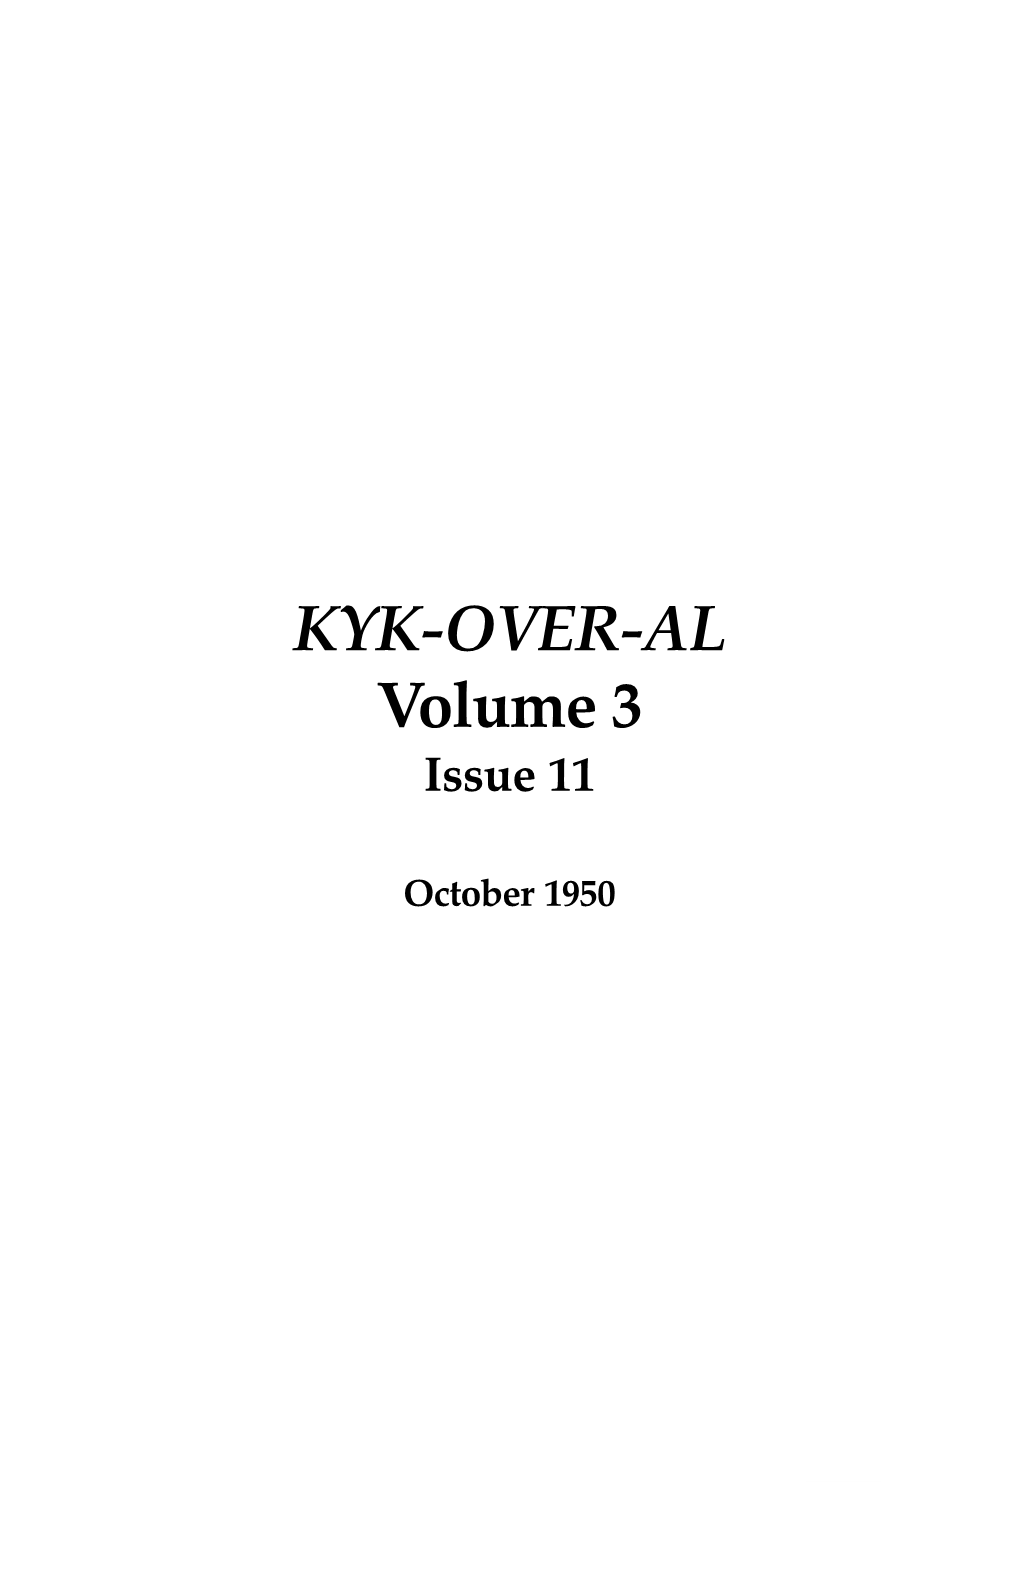 Kyk-Over-Al Volume 2 Issue 11